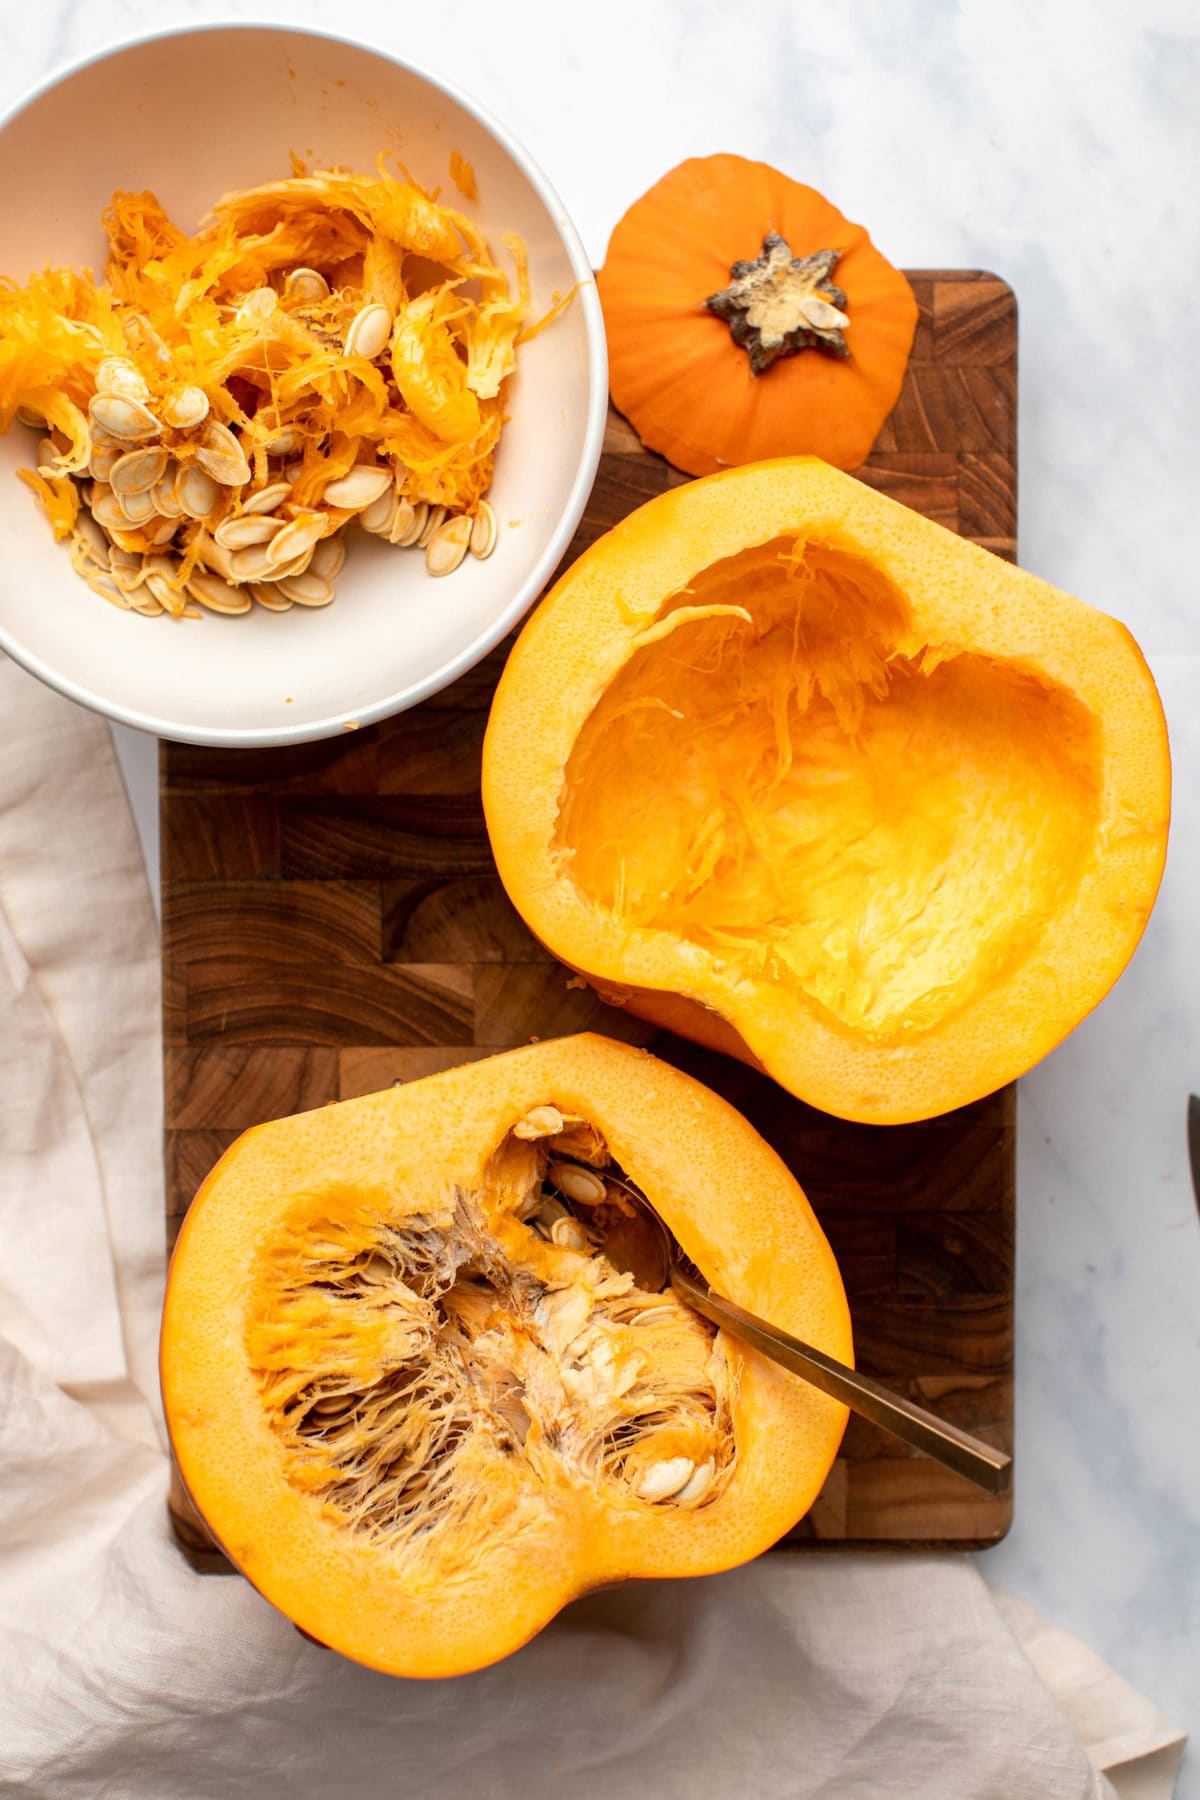 Pie pumpkin cut in half, with one half de-seeded and the other half being scooped out with a spoon